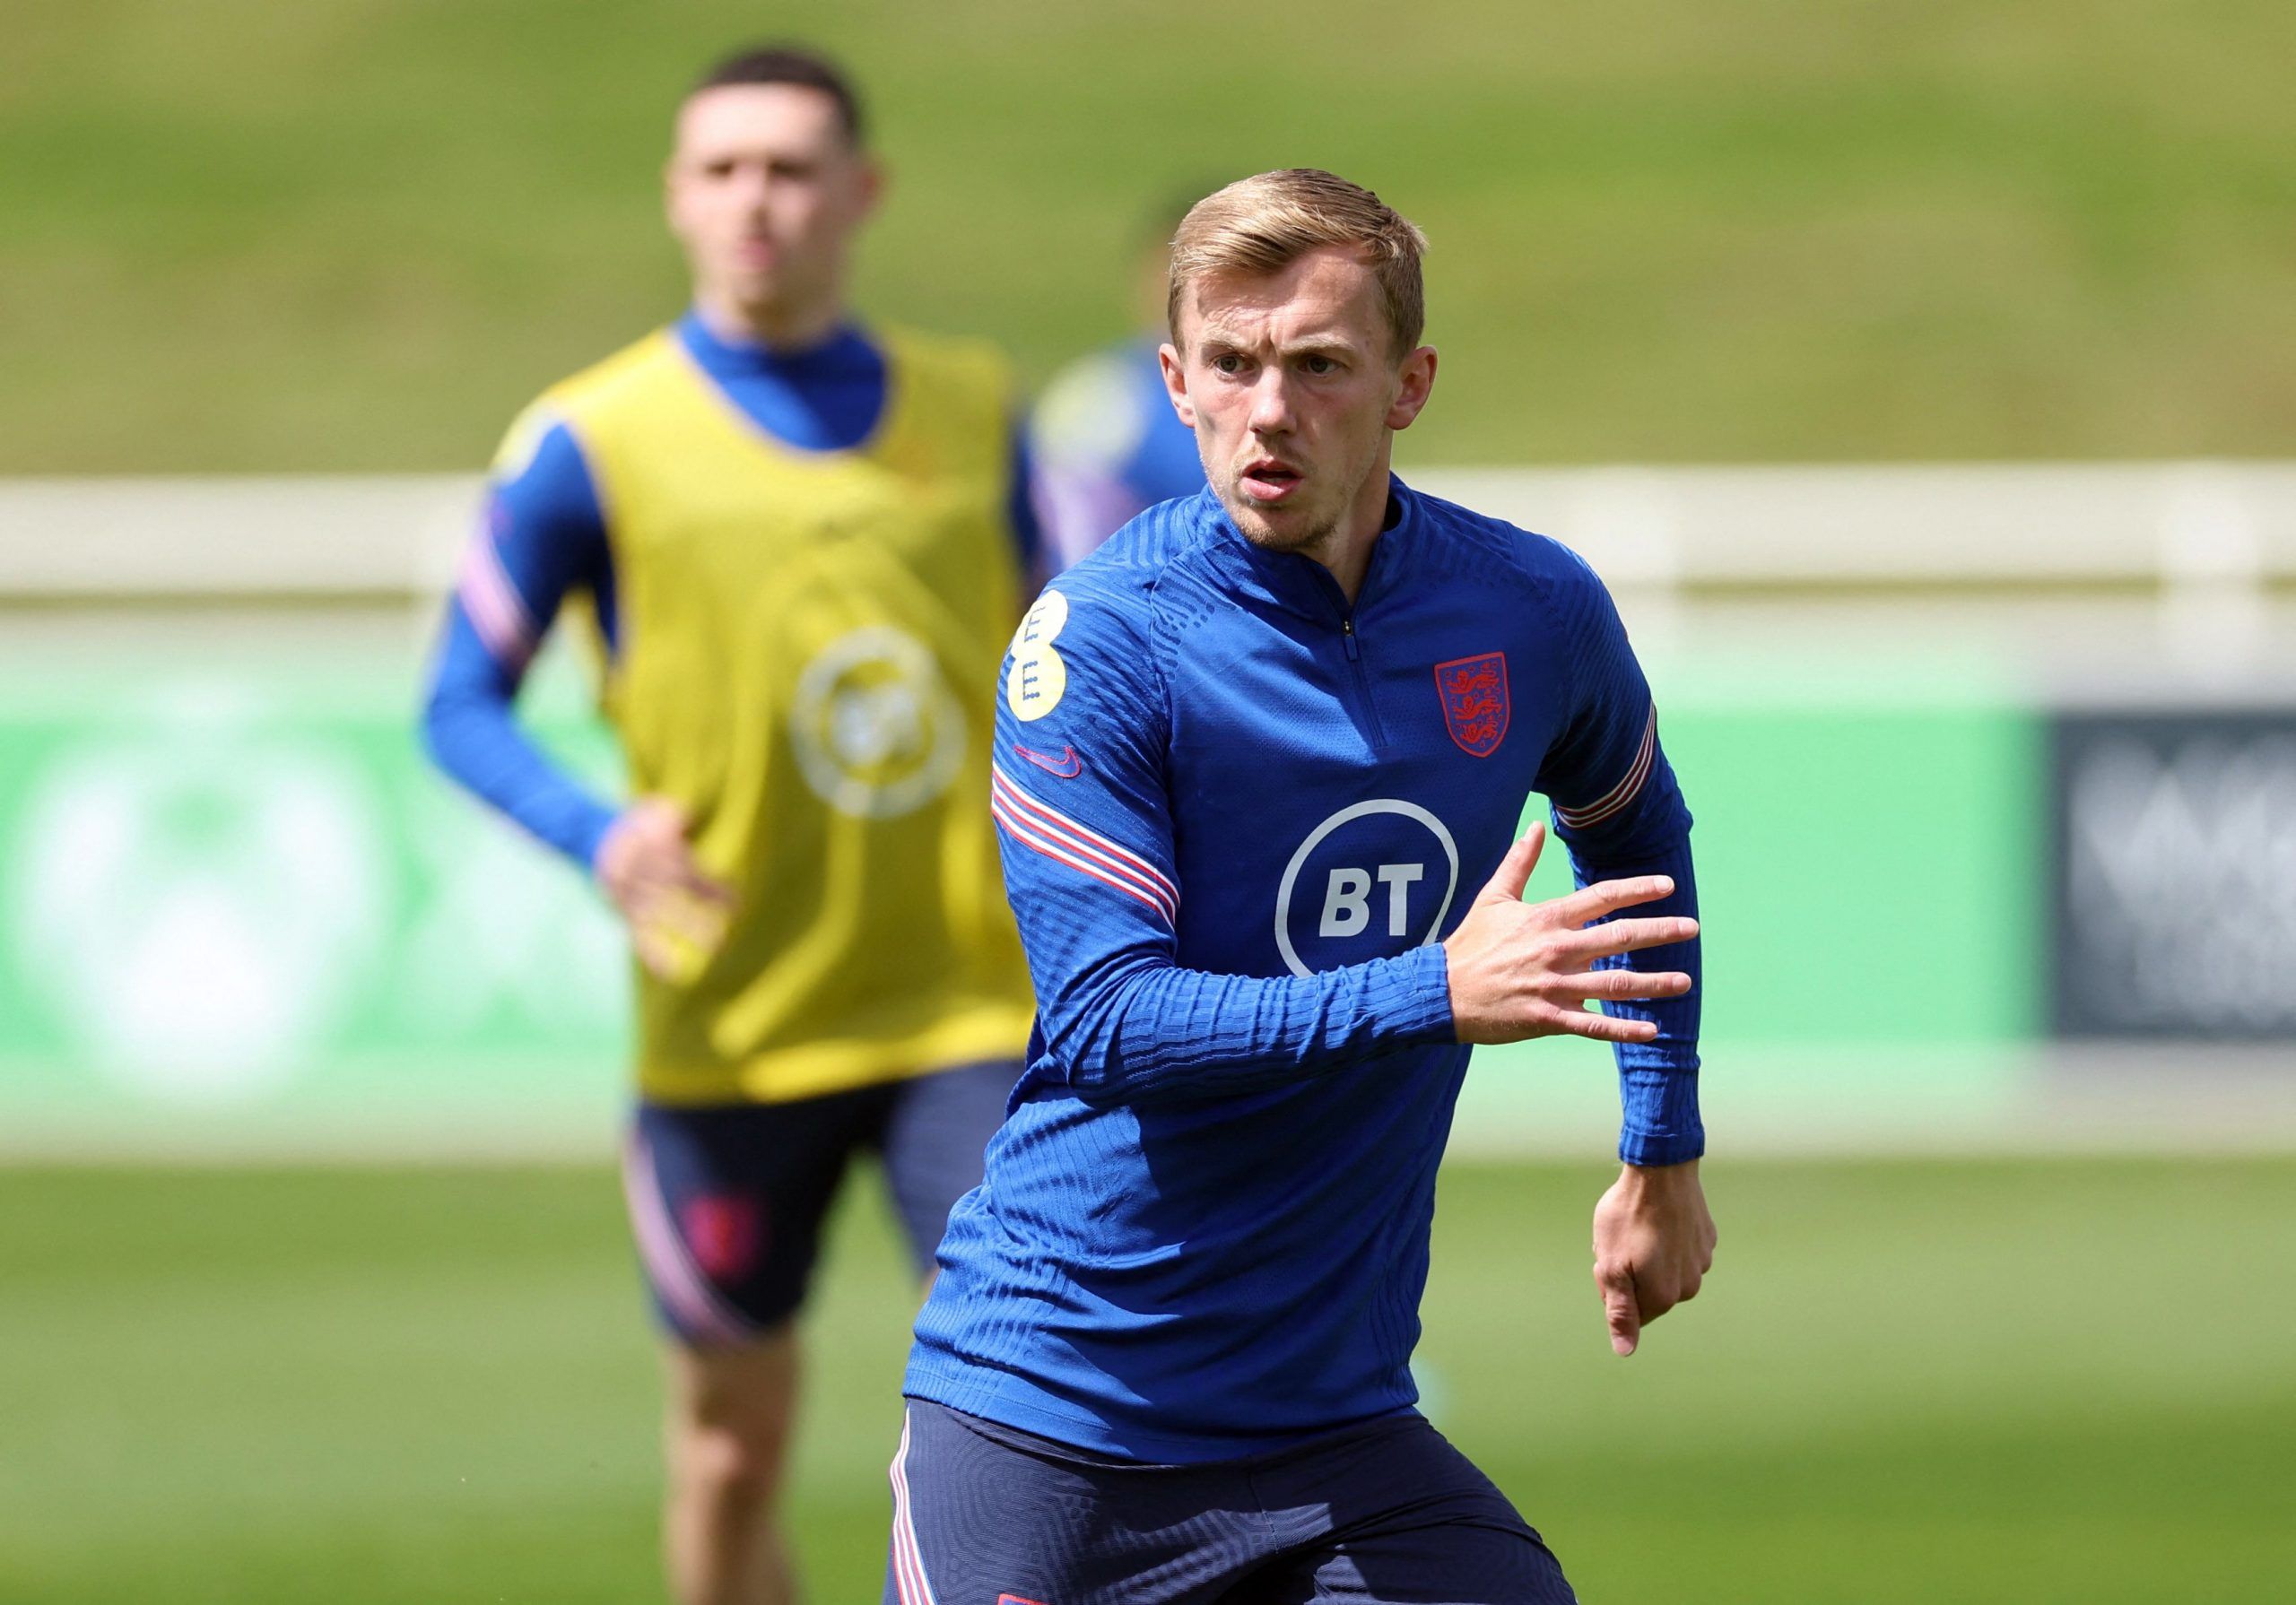 james-ward-prowse-west-ham-united-transfer-news-premier-league-david-moyes-next-mark-noble-declan-rice-transfer-latestSoccer Football - UEFA Nations League - England Training - St George's Park, Burton Upon Trent, Britain - June 10, 2022 England's James Ward-Prowse during training Action Images via Reuters/Carl Recine